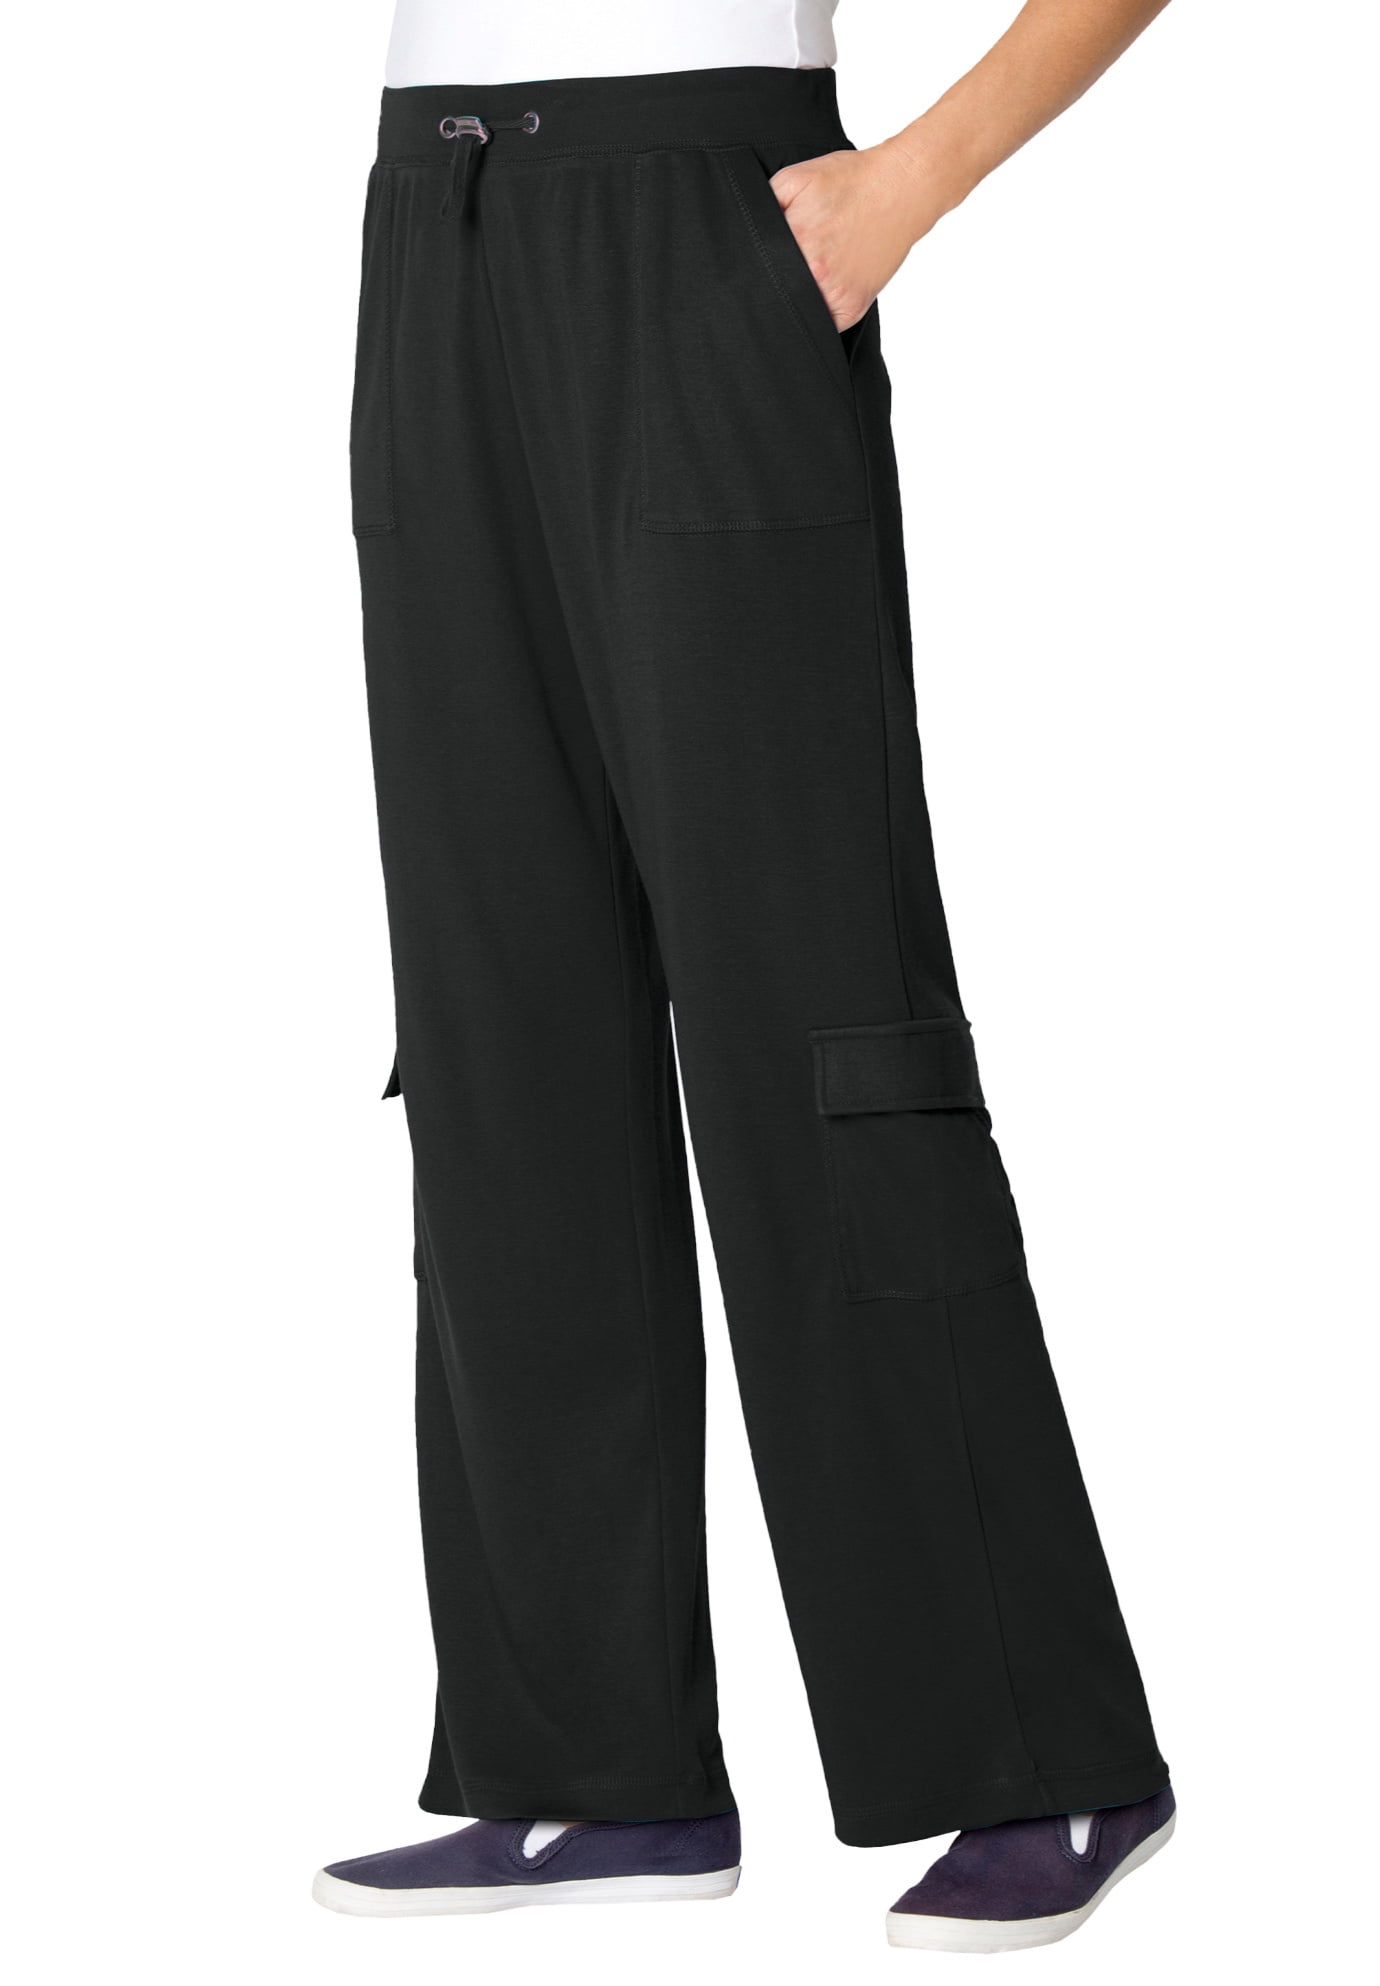 Woman Within Women's Plus Size Pull-On Elastic Waist Soft Pants Pants